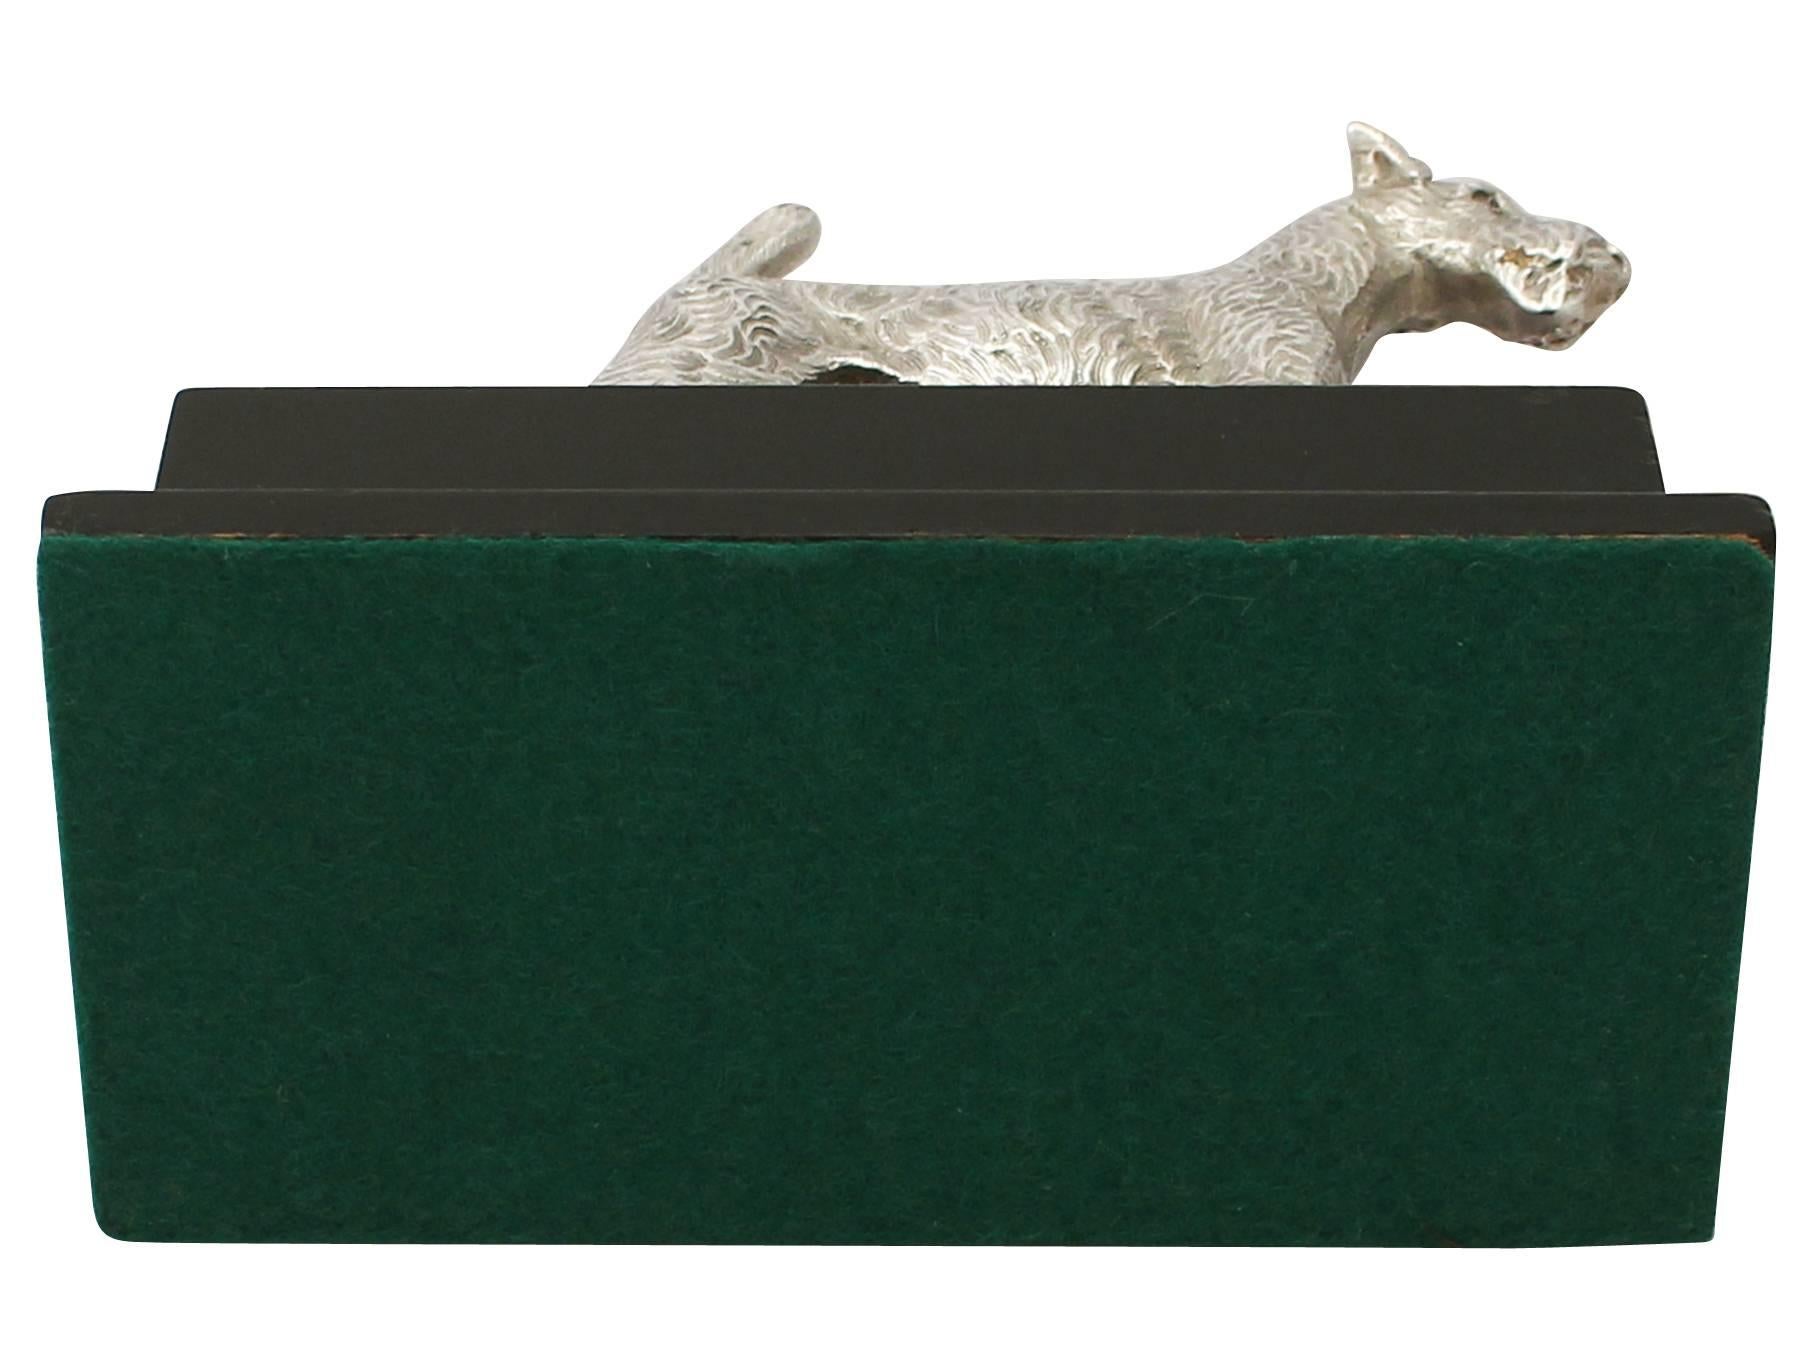 Sterling Silver Airedale Terrier Presentation Model 2